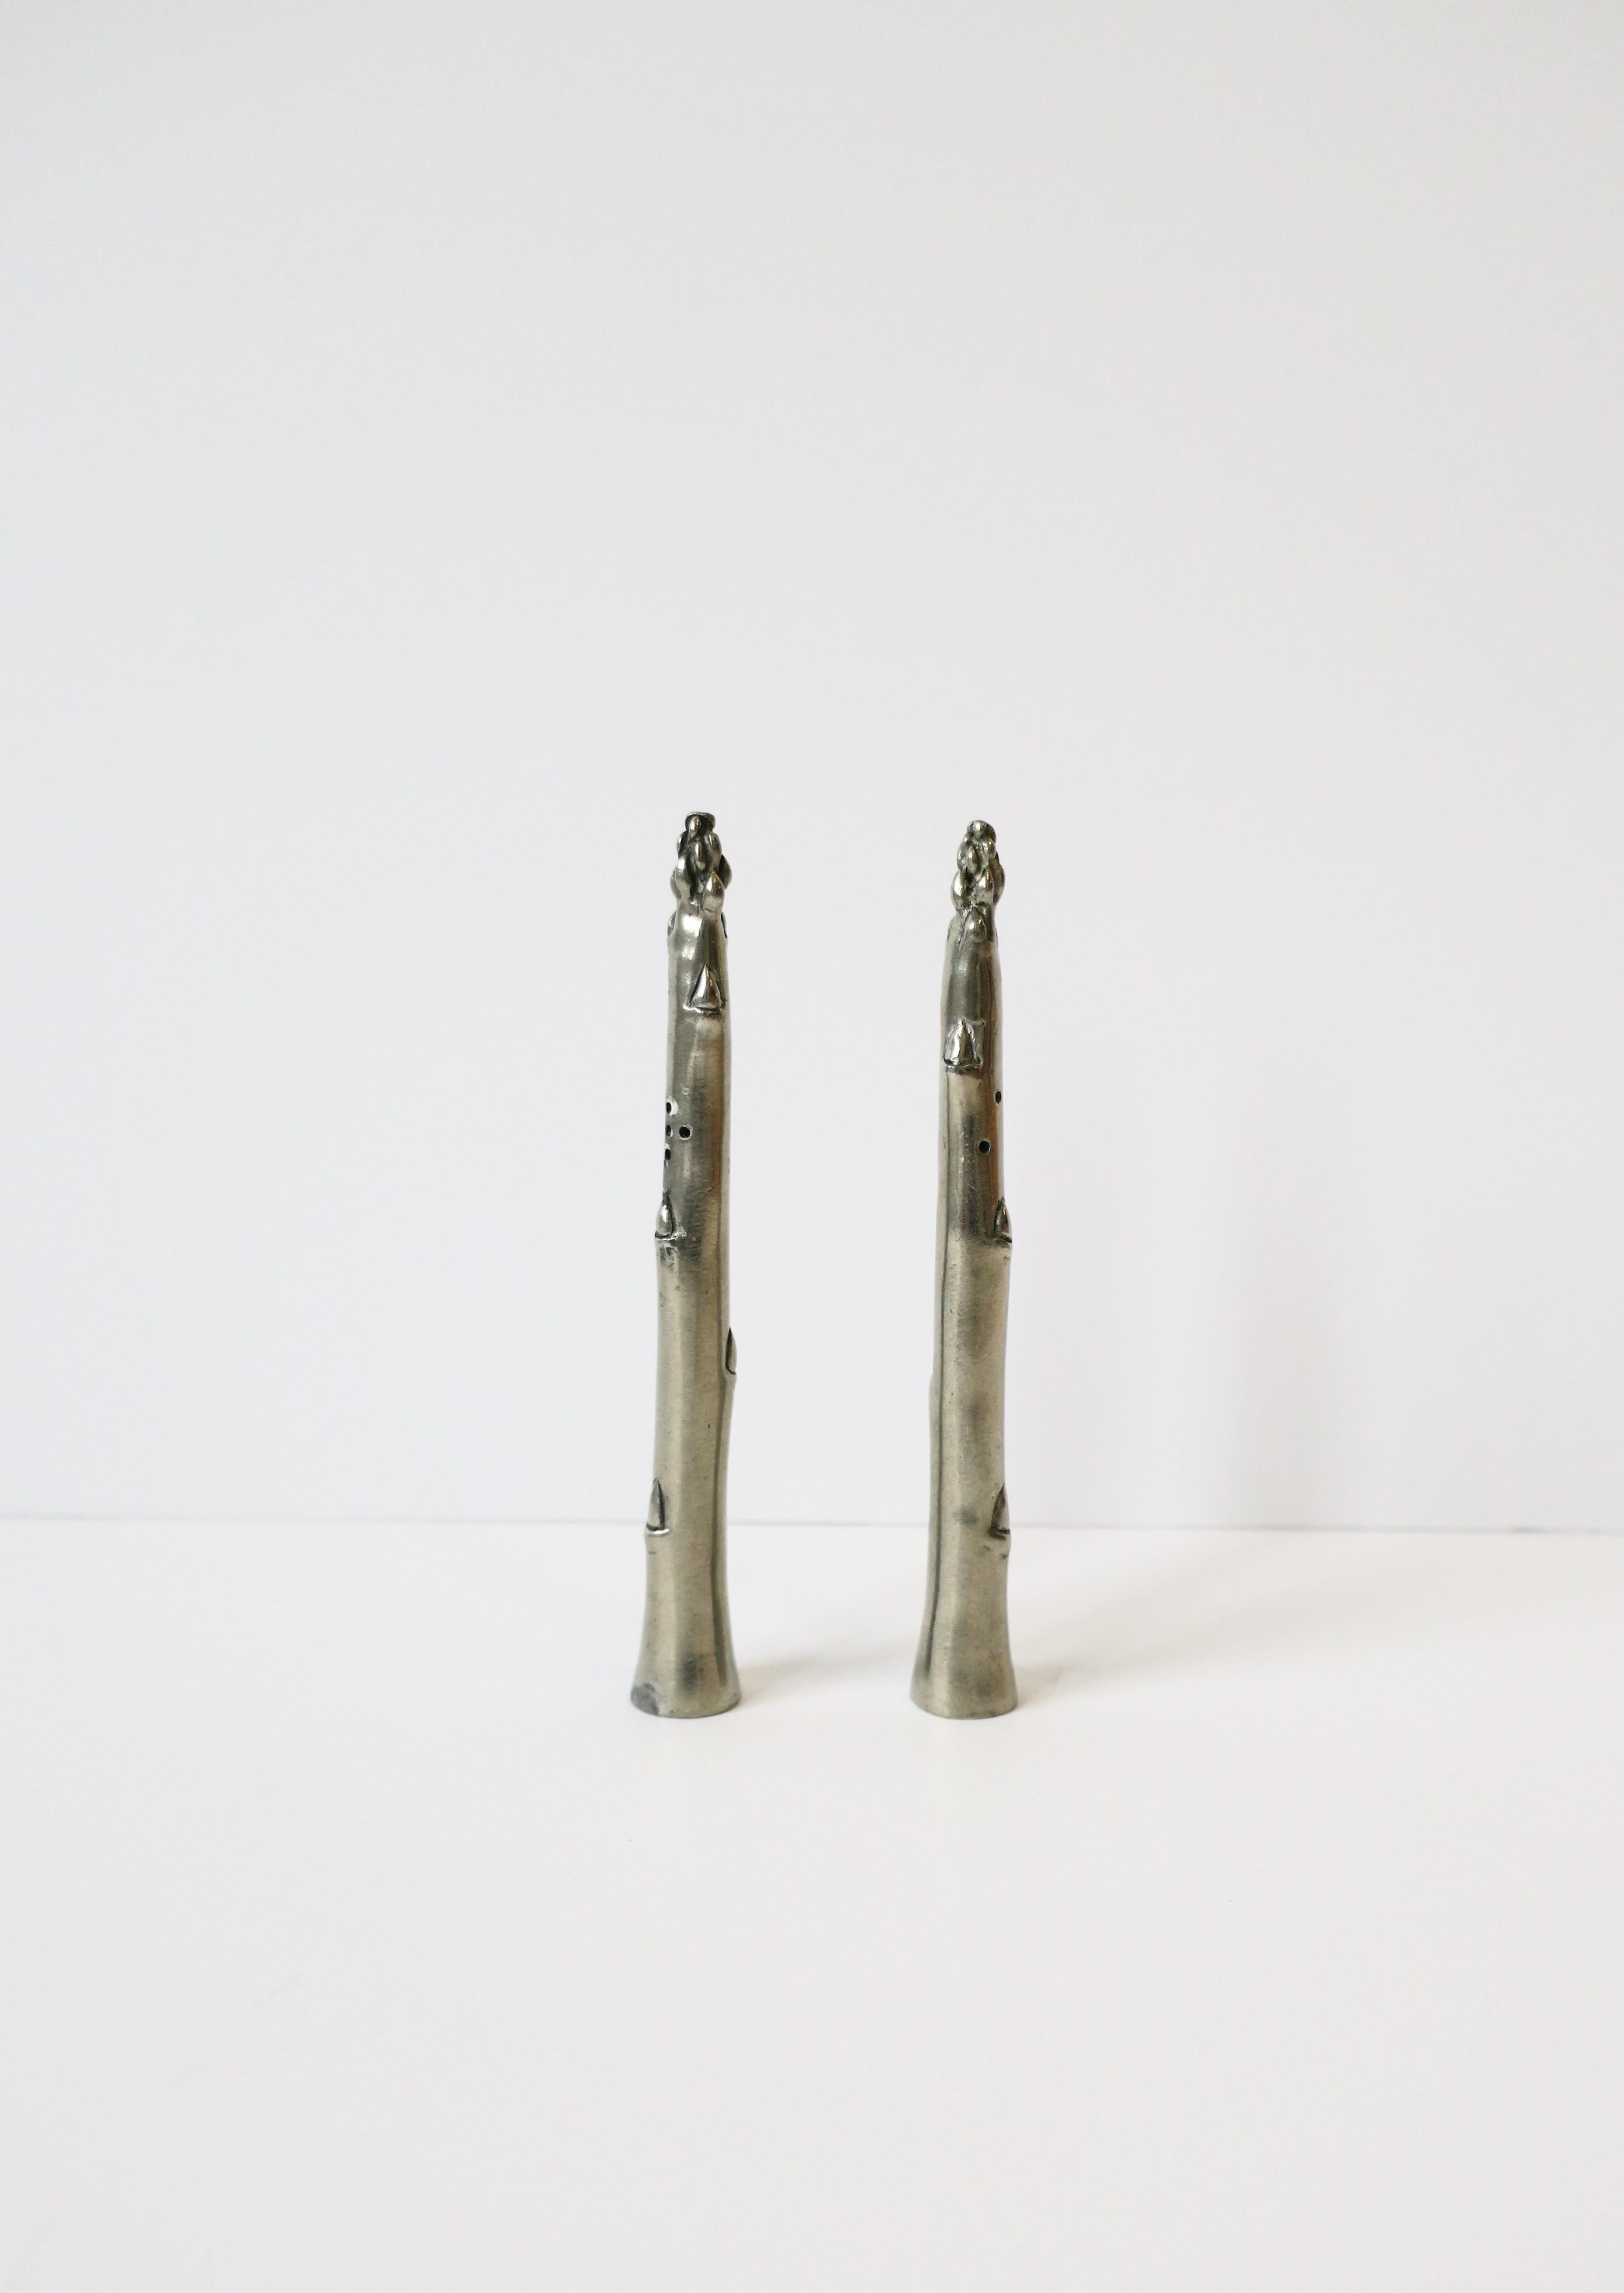 A pair/set of vintage Asparagus vegetable silver metal salt and pepper shakers, circa mid-20th century. 

Dimensions: .75